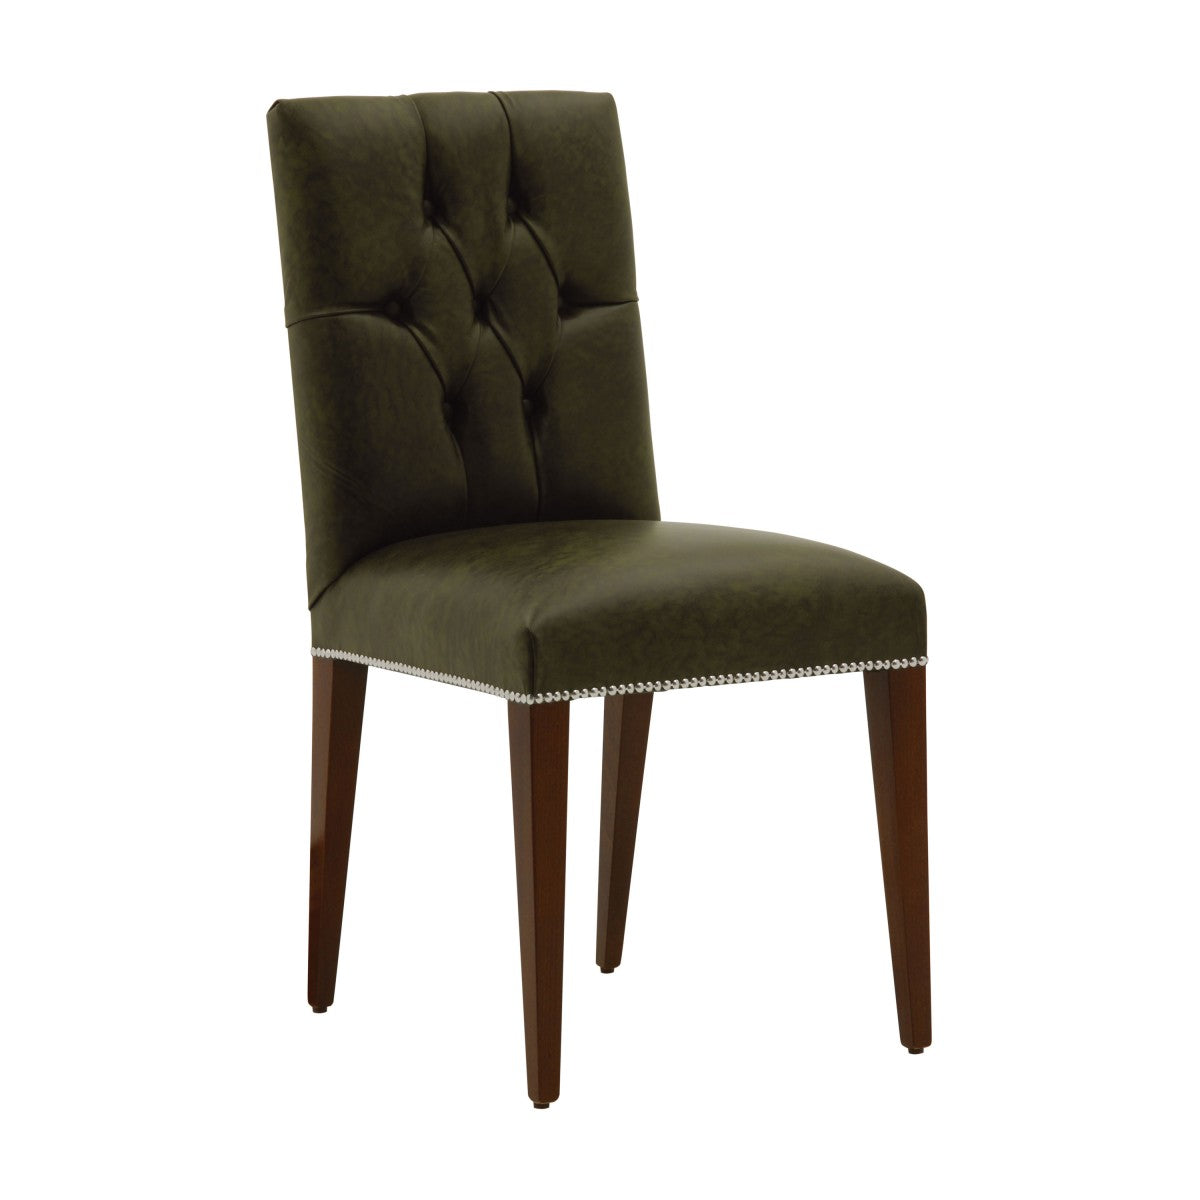 Arianna Bespoke Upholstered Modern Contemporary Dining Chair MS324S Custom Made To Order